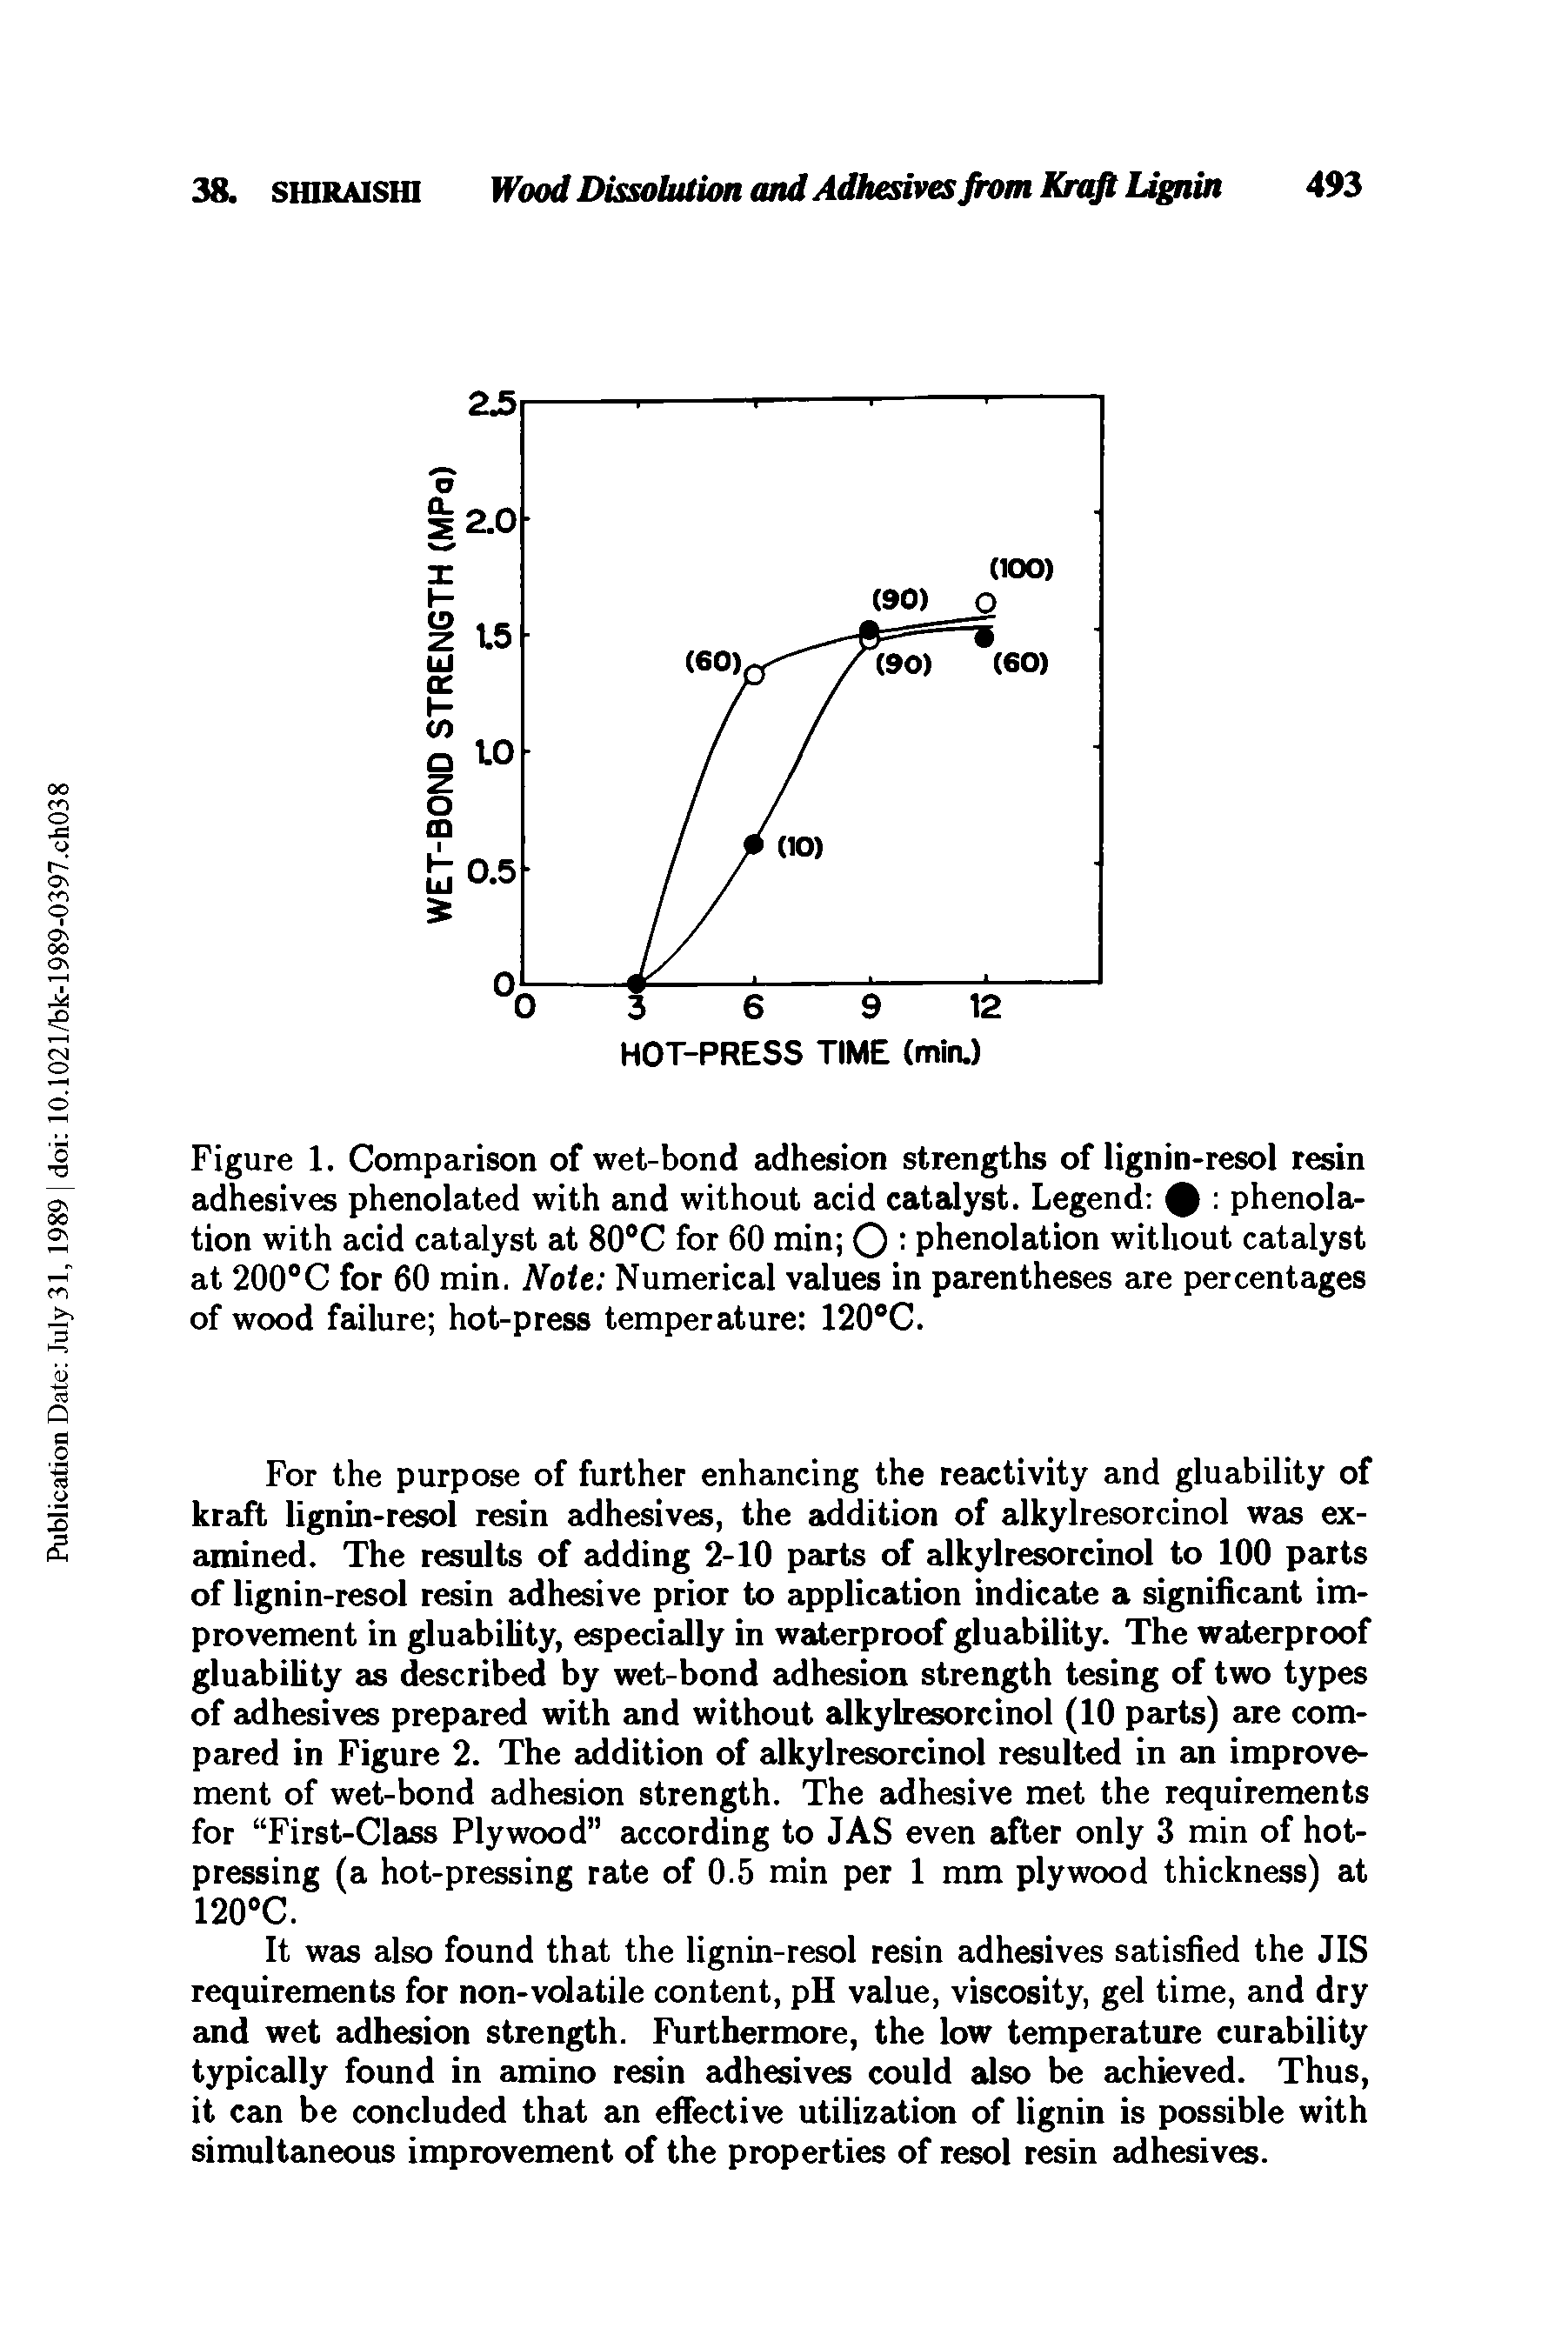 Figure 1. Comparison of wet-bond adhesion strengths of lignin-resol resin adhesives phenolated with and without acid catalyst. Legend phenola-tion with acid catalyst at 80°C for 60 min Q phenolation without catalyst at 200°C for 60 min. Note Numerical values in parentheses are percentages of wood failure hot-press temperature 120°C.